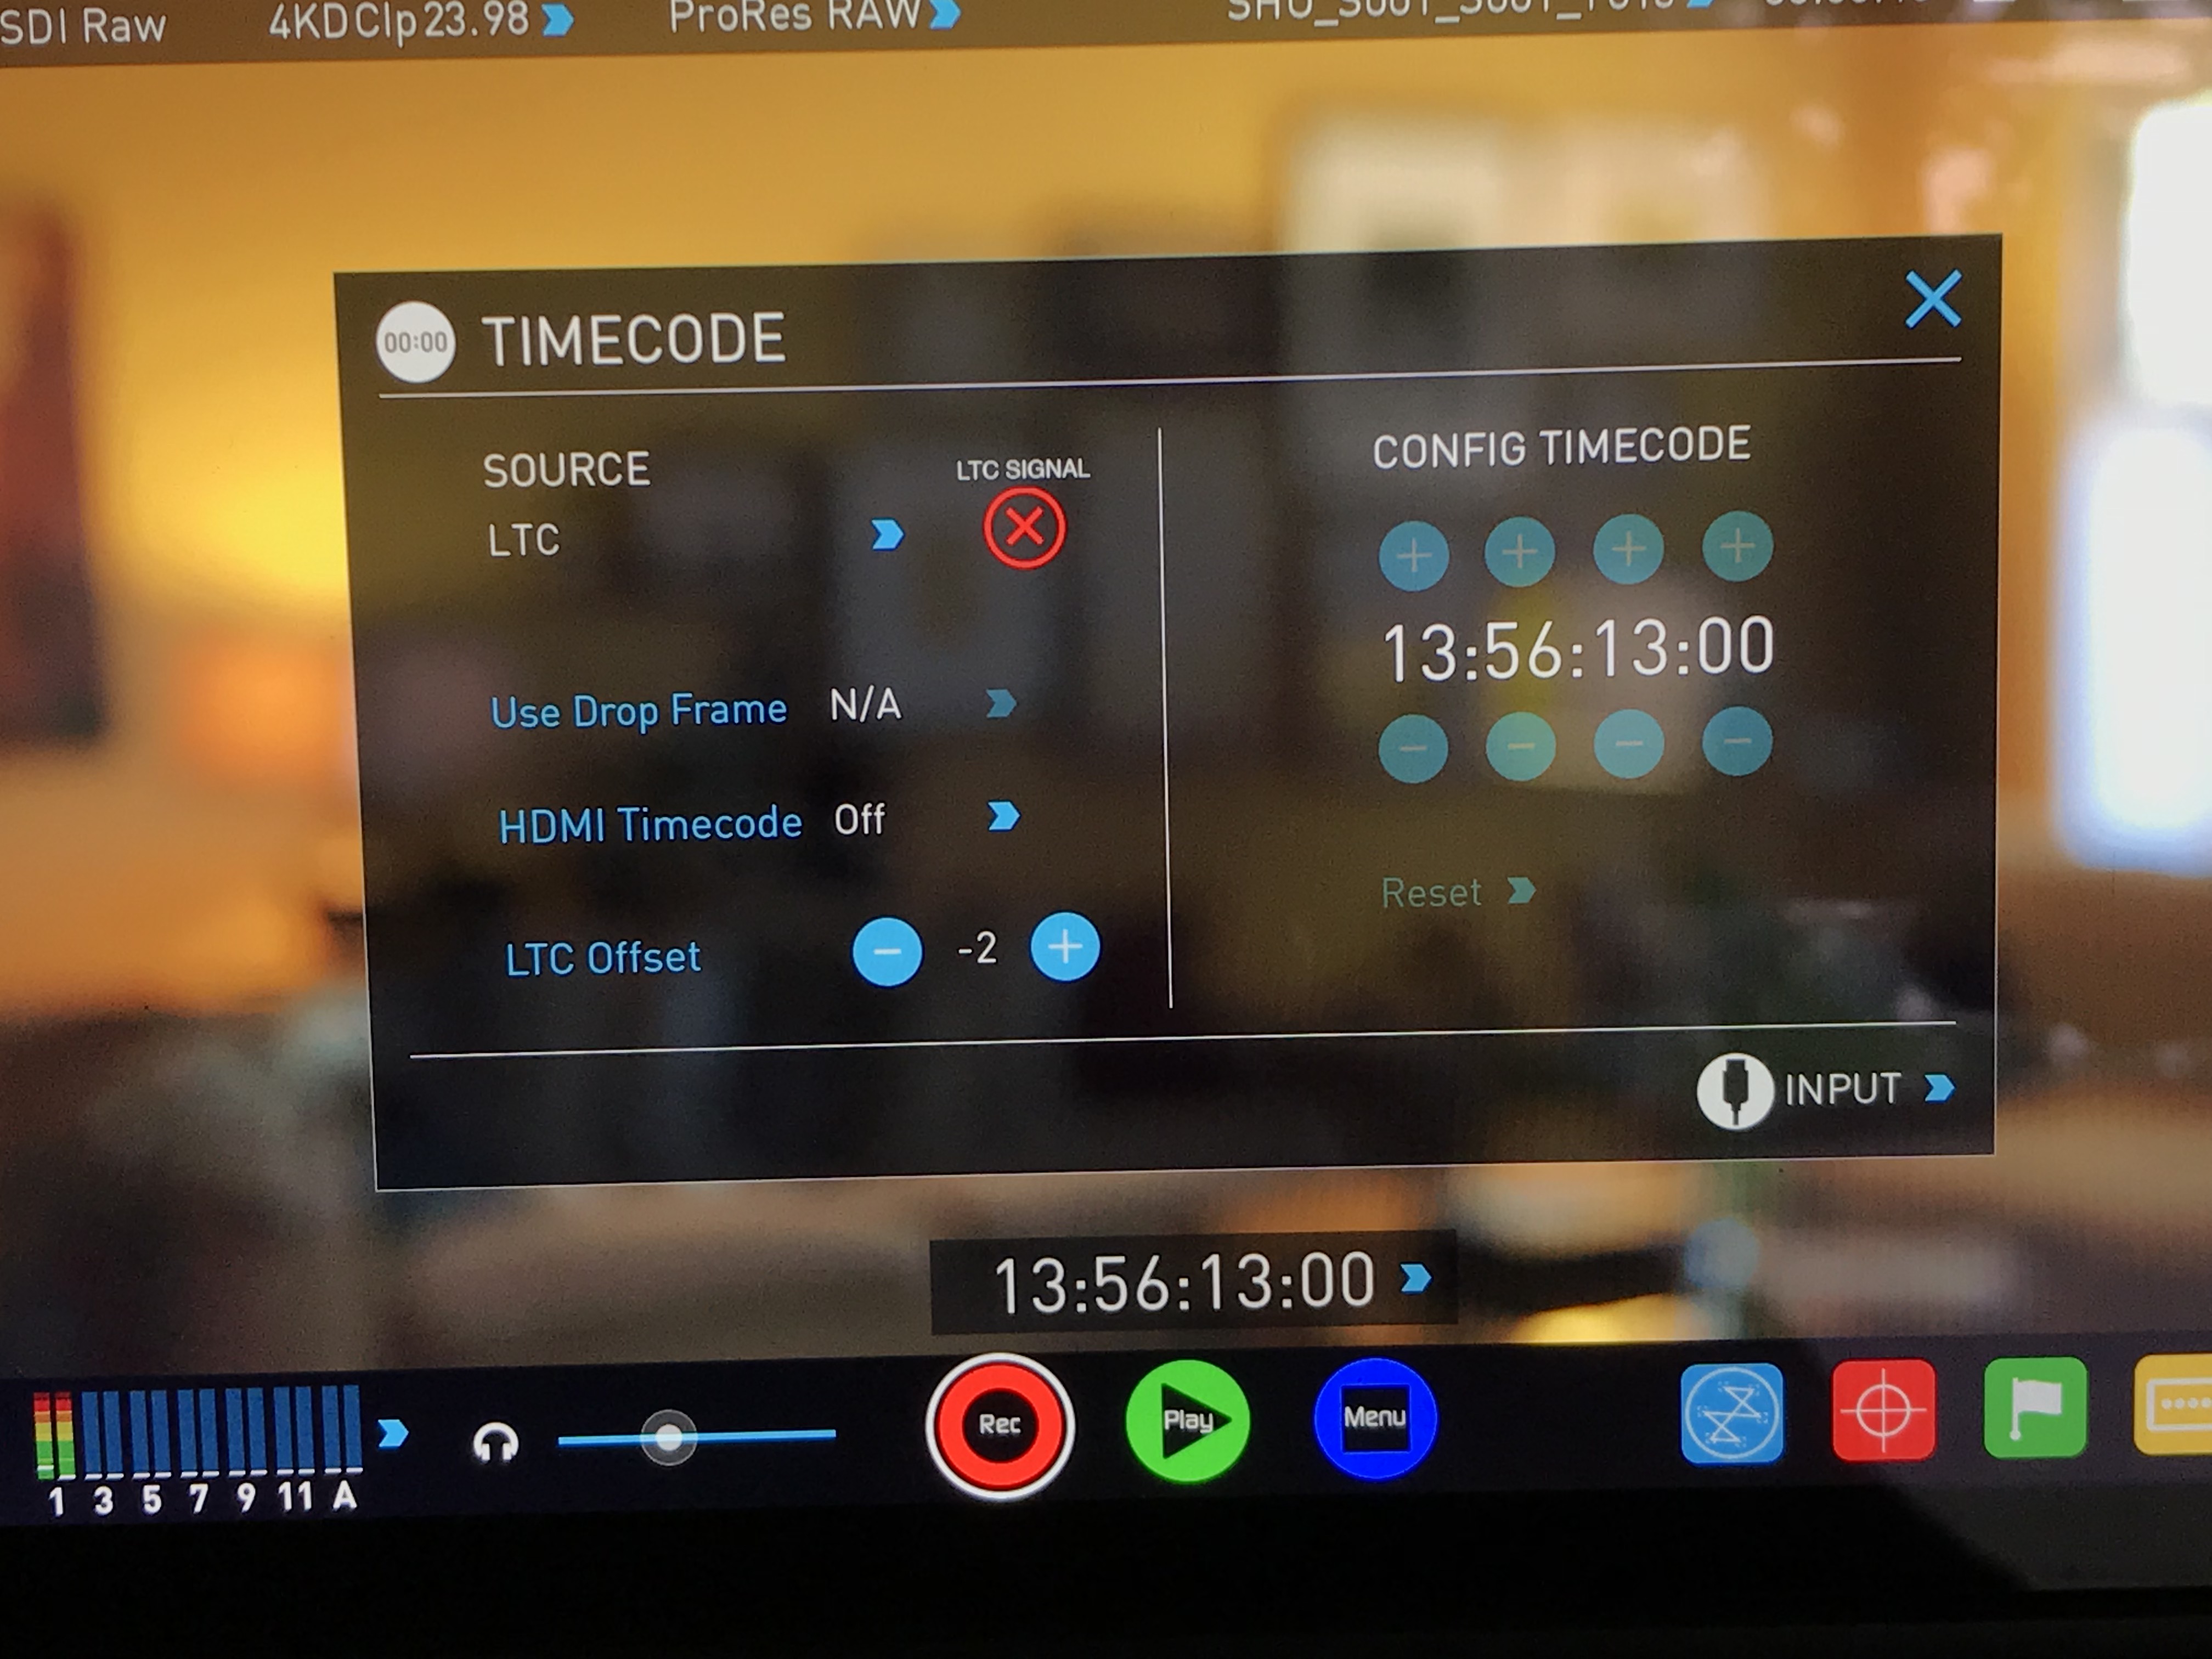 Shogun Inferno's timecode controls allow offsetting the TC signal. I find a -2 offset works best.